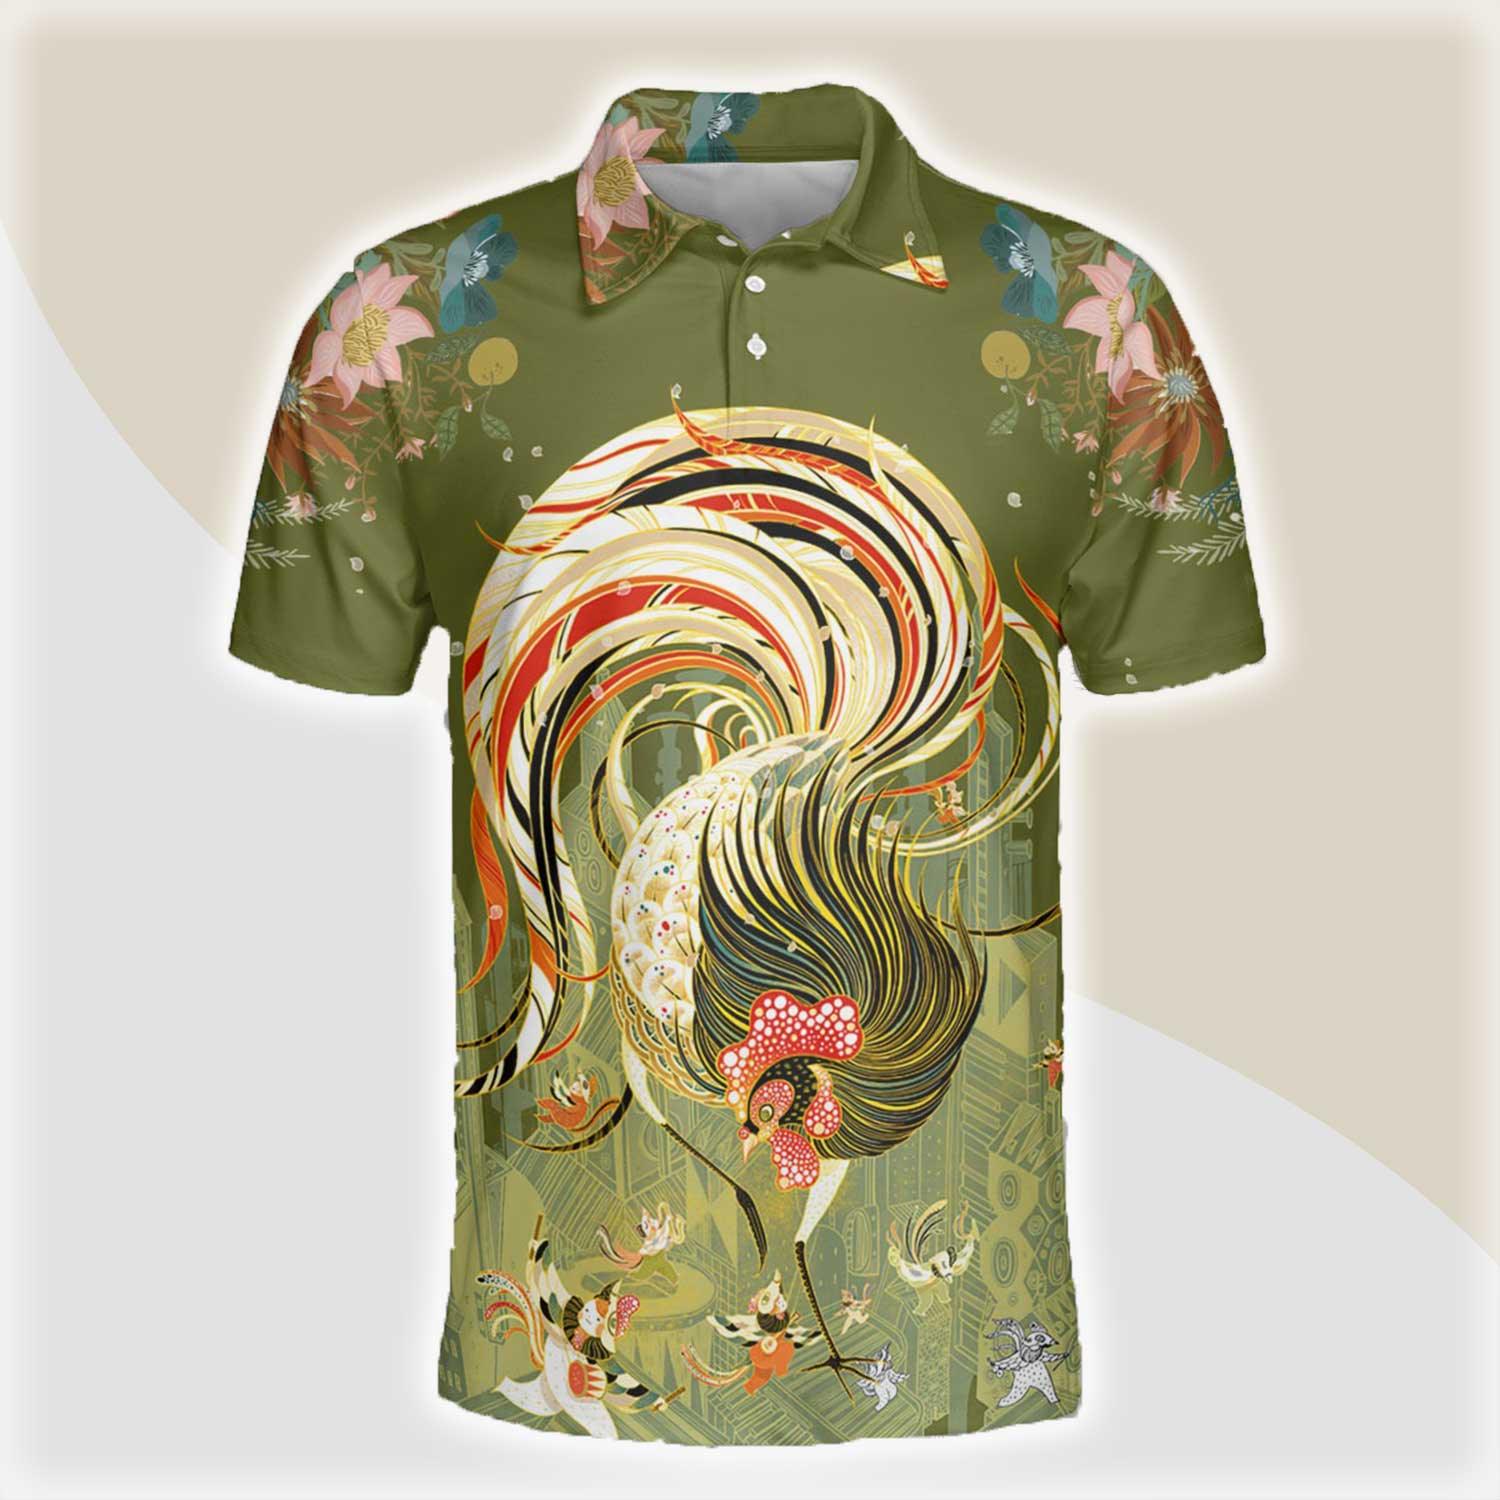 Chicken Men Polo Shirts For Summer - Chicken Watercolor Flower Pattern Button Shirts For Men - Perfect Gift For Chicken Lovers, Animal Lovers - Amzanimalsgift